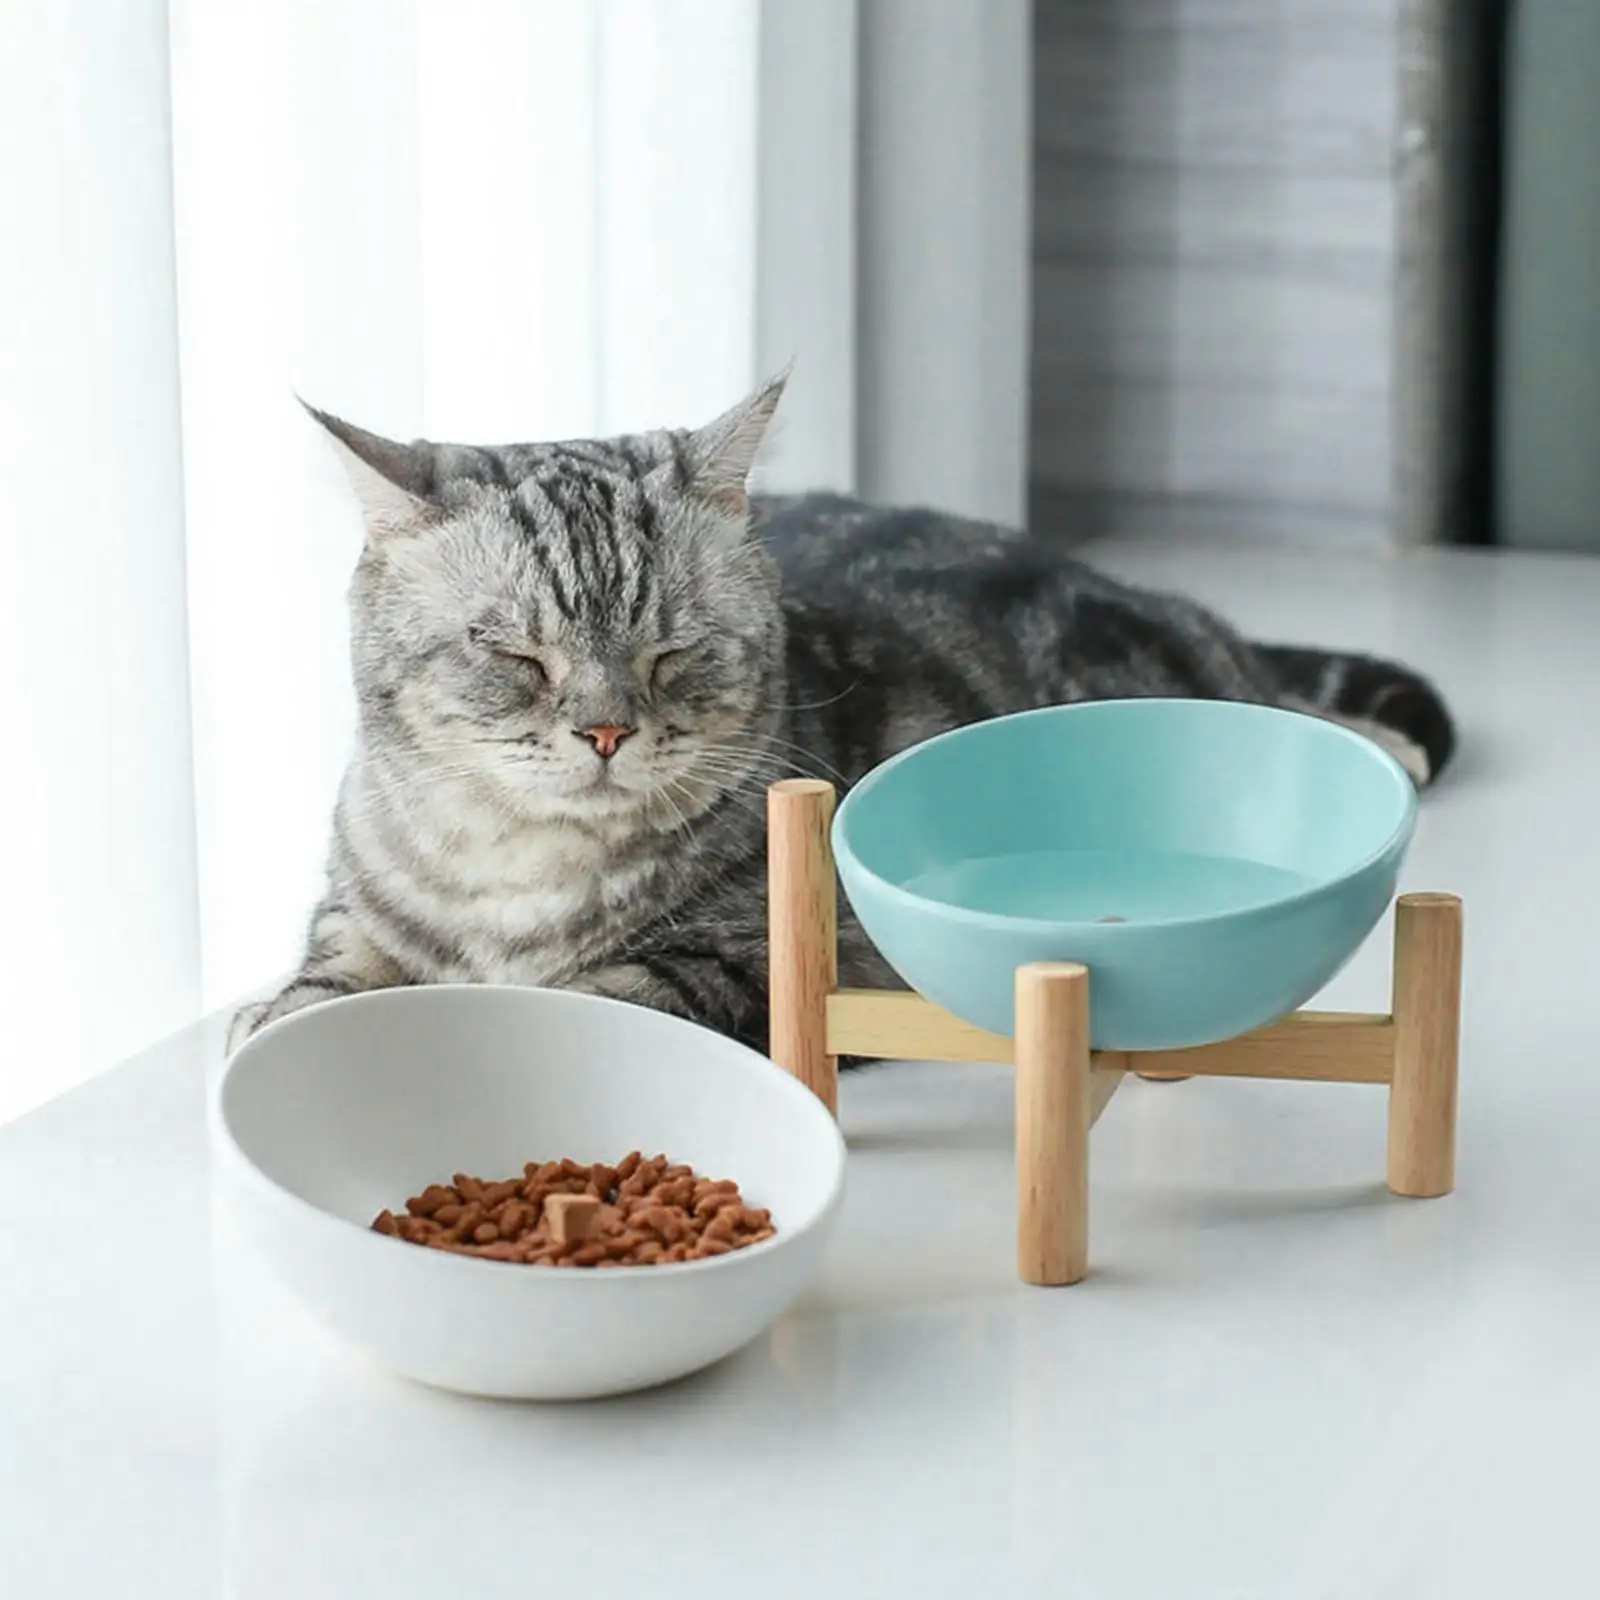 45 Tilting Cat Bowl with Stand Water Feeder Feeding Easy Cleaning Stable Durable Ceramic Dog Bowl for Cats Dogs